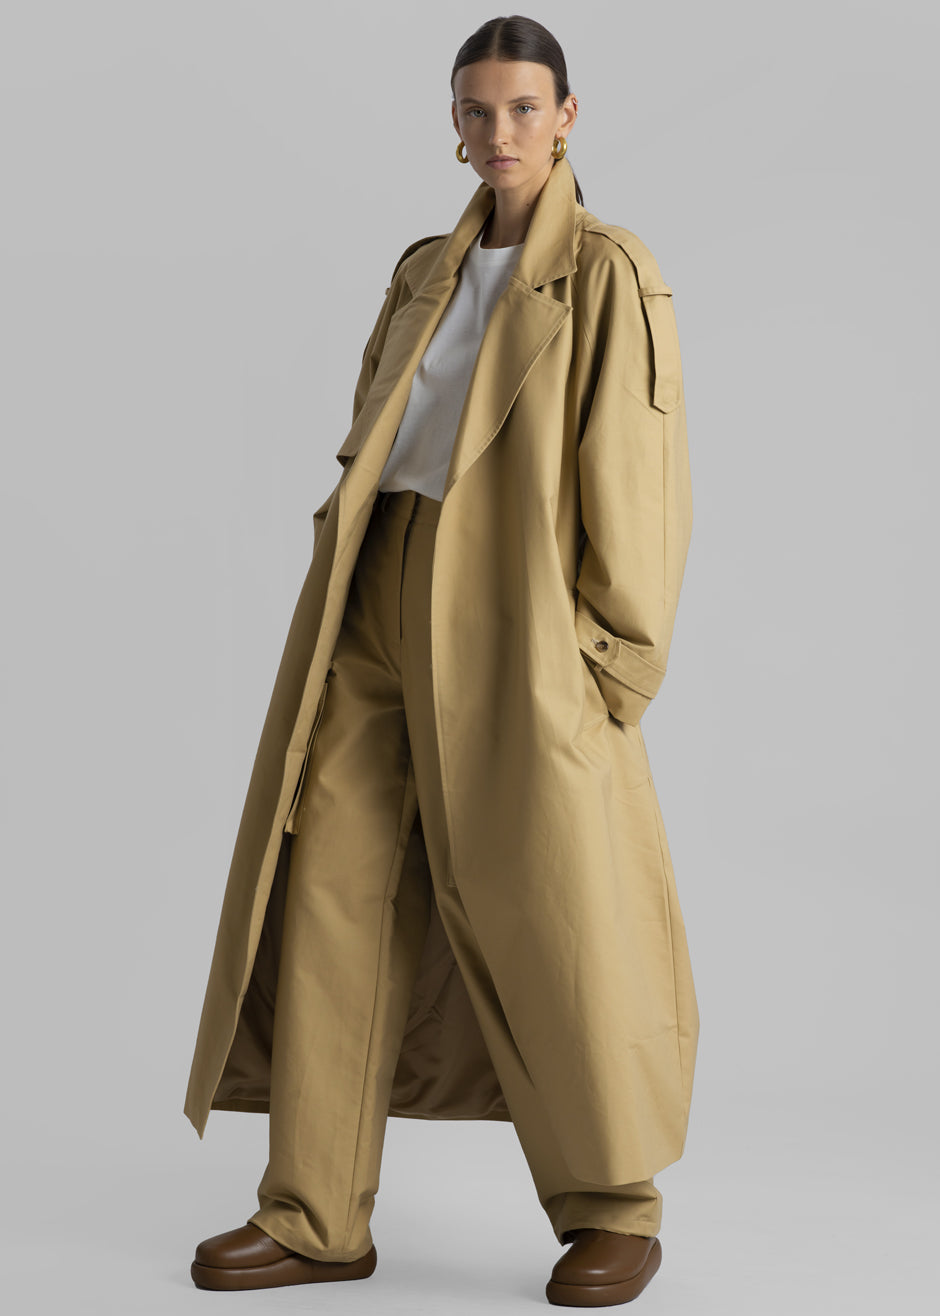 Suzanne Trench Coat - Beige – The Frankie Shop